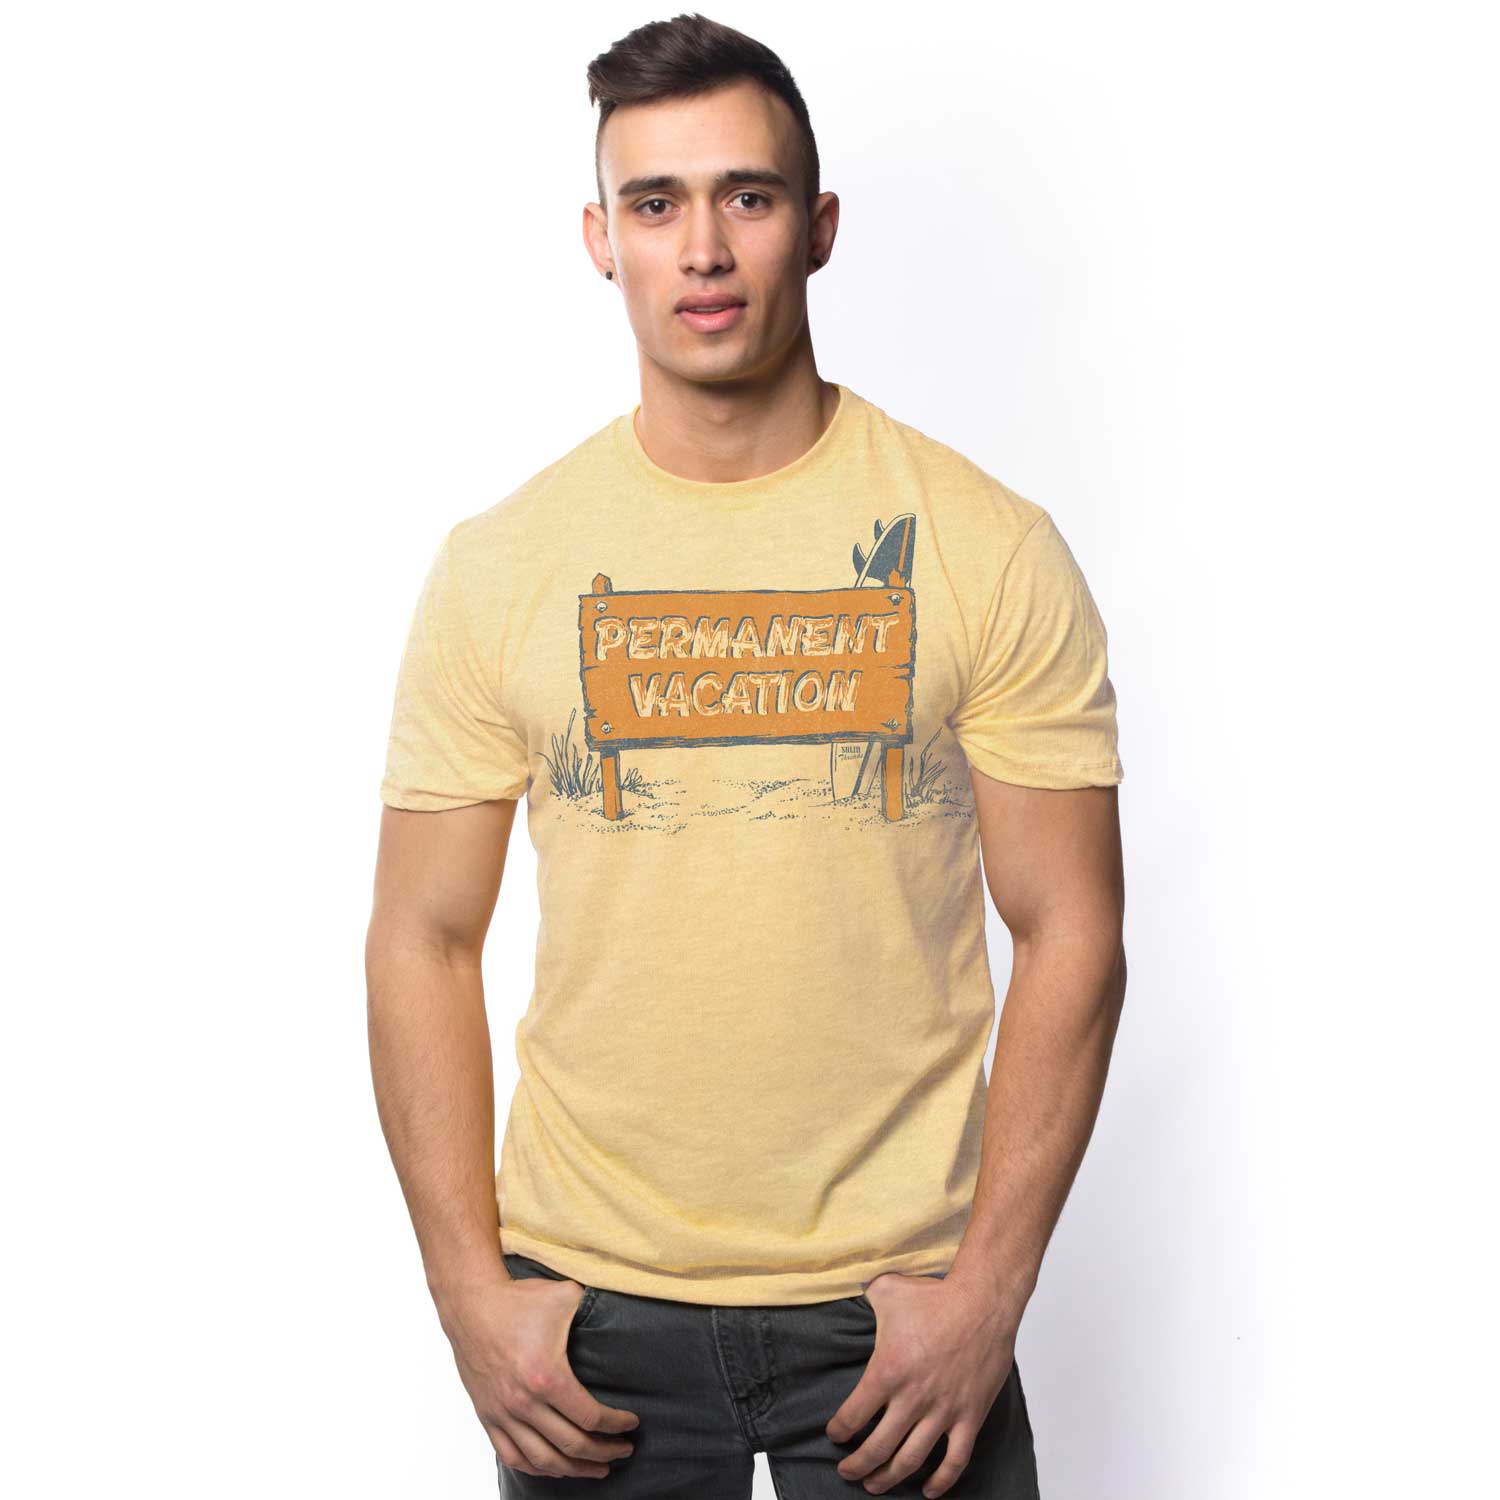 Men's Permanent Vacation Vintage Graphic Tee | Cool Beach T-shirt | Solid Threads